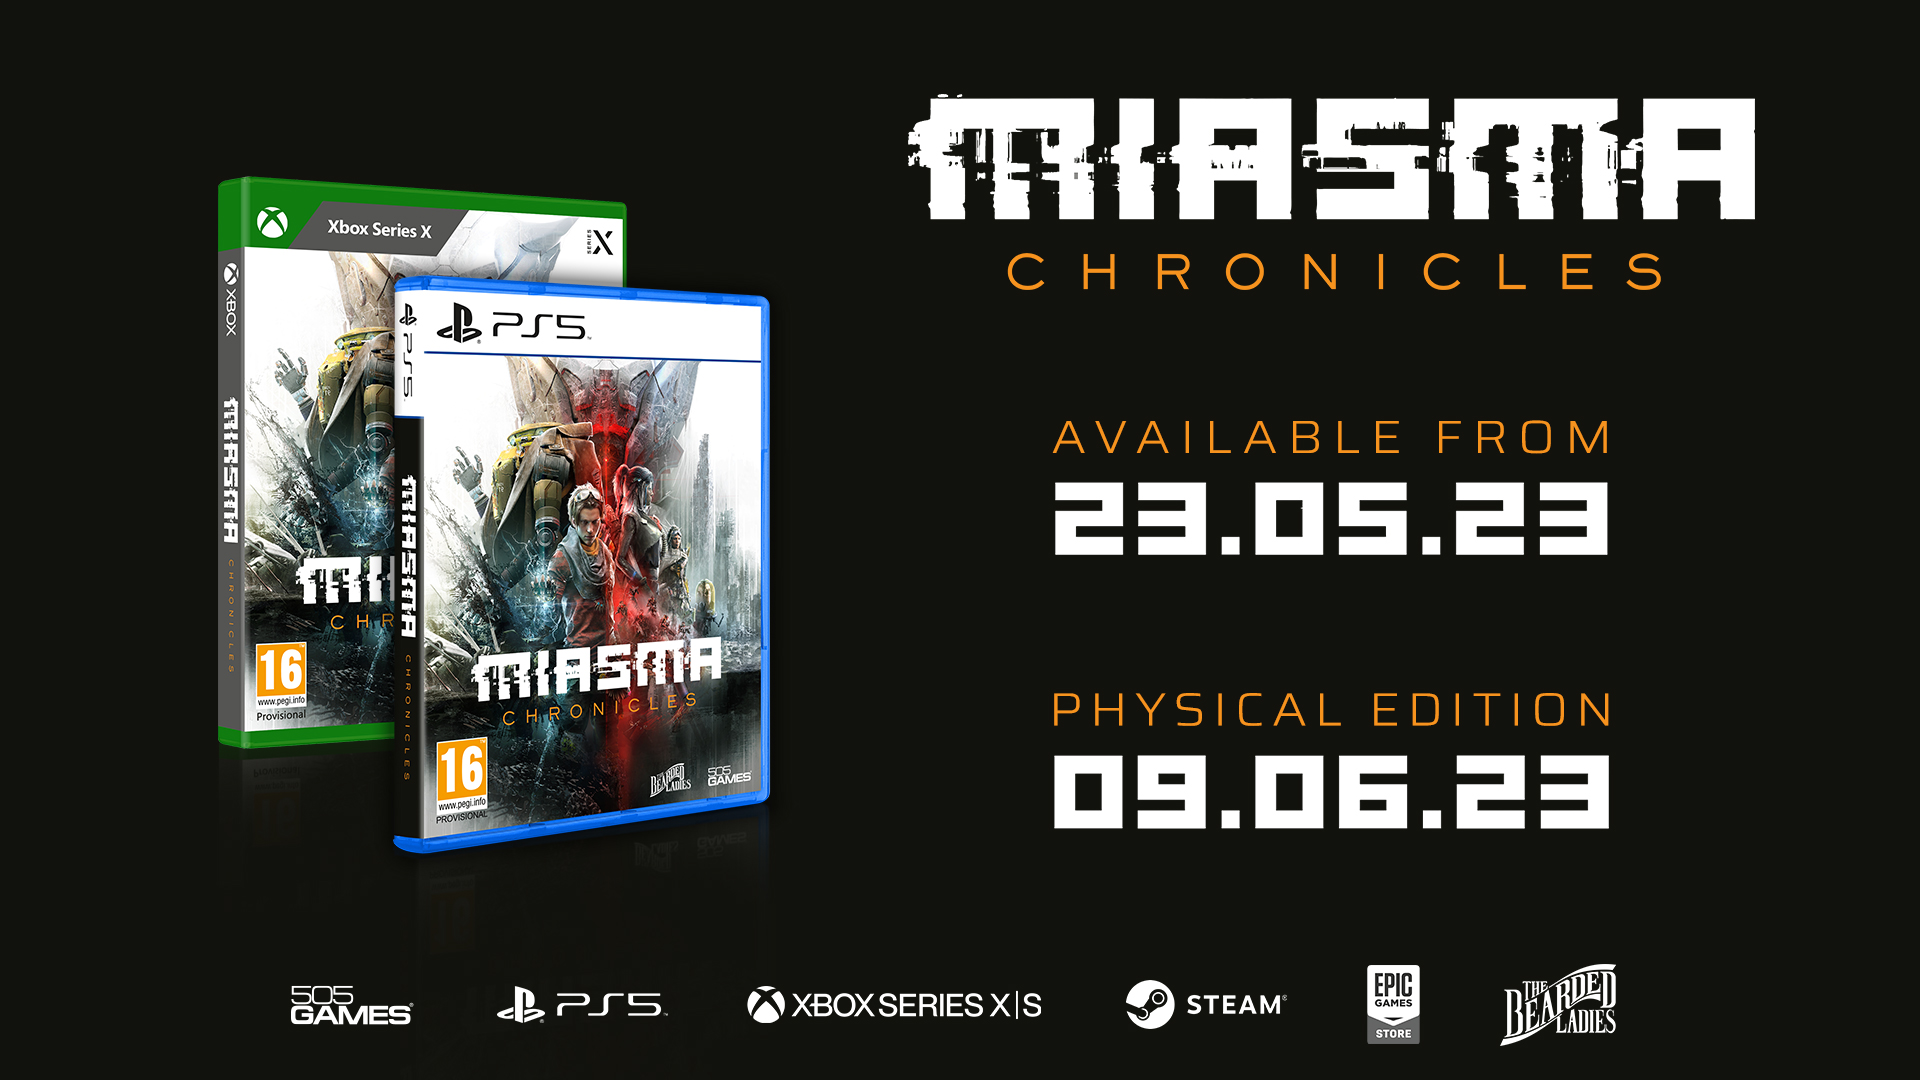 An image showing the Miasma Chronicles Release Date. Digital, May 23rd, 2023 & Physical, June 9th. 2023